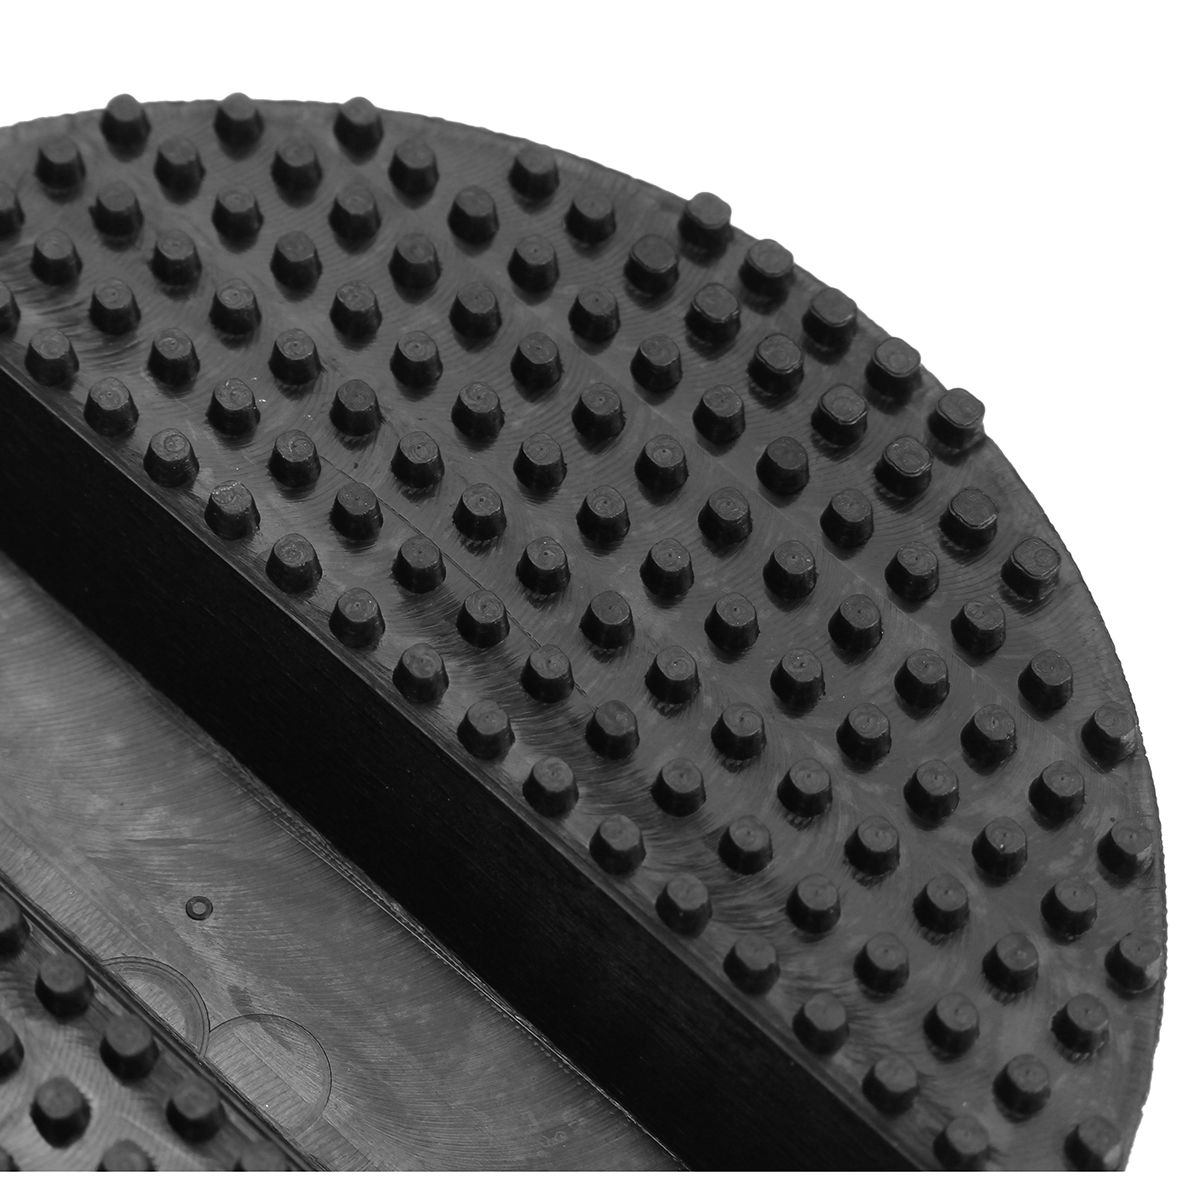 65x37mm-Universal-Slotted-Frame-Rail-Floor-Jack-Guard-Adapter-Lift-Rubber-Pad-Rubber-Mat-1574798